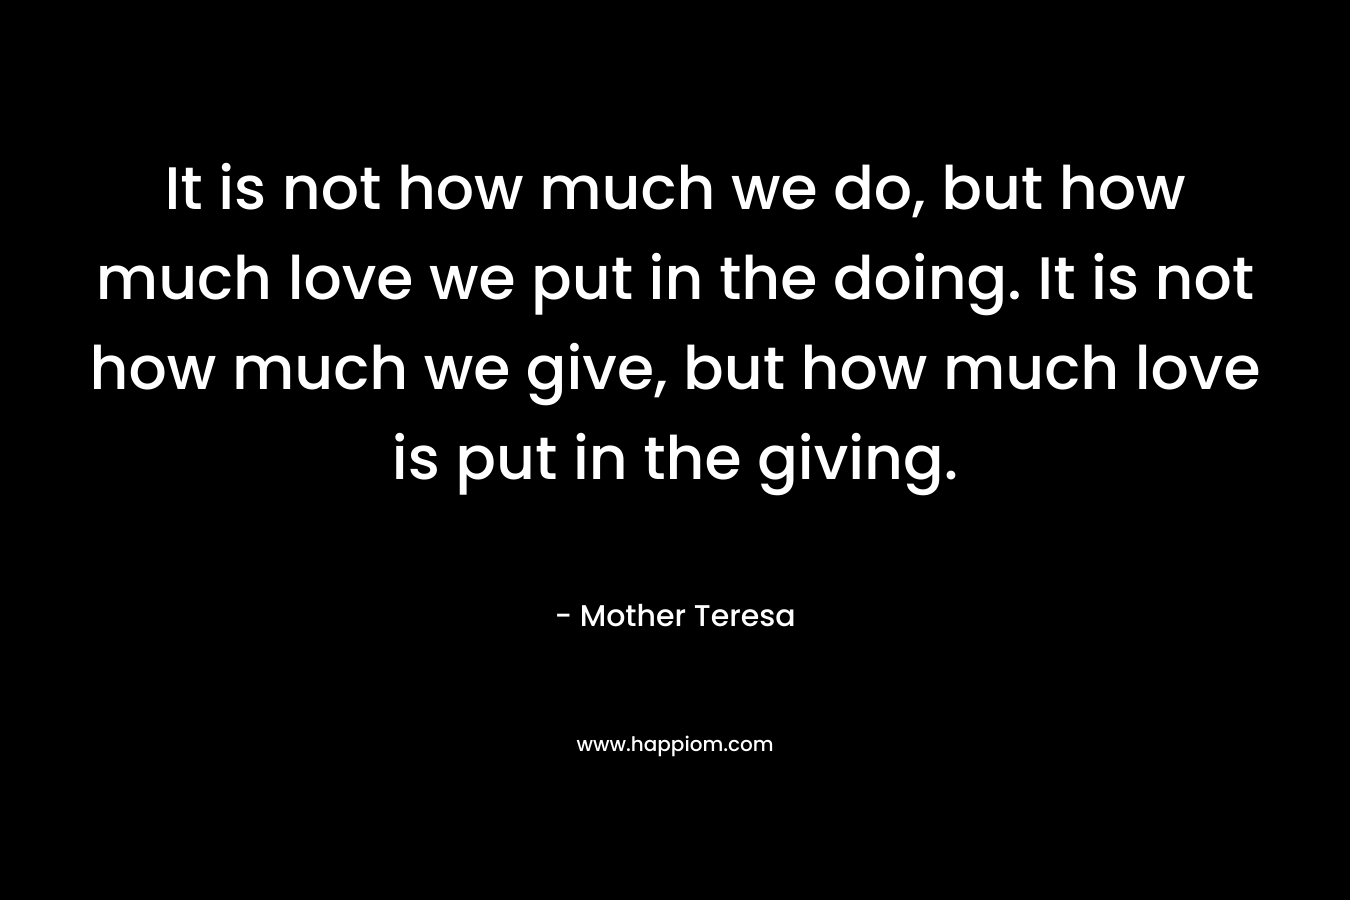 It is not how much we do, but how much love we put in the doing. It is not how much we give, but how much love is put in the giving. – Mother Teresa